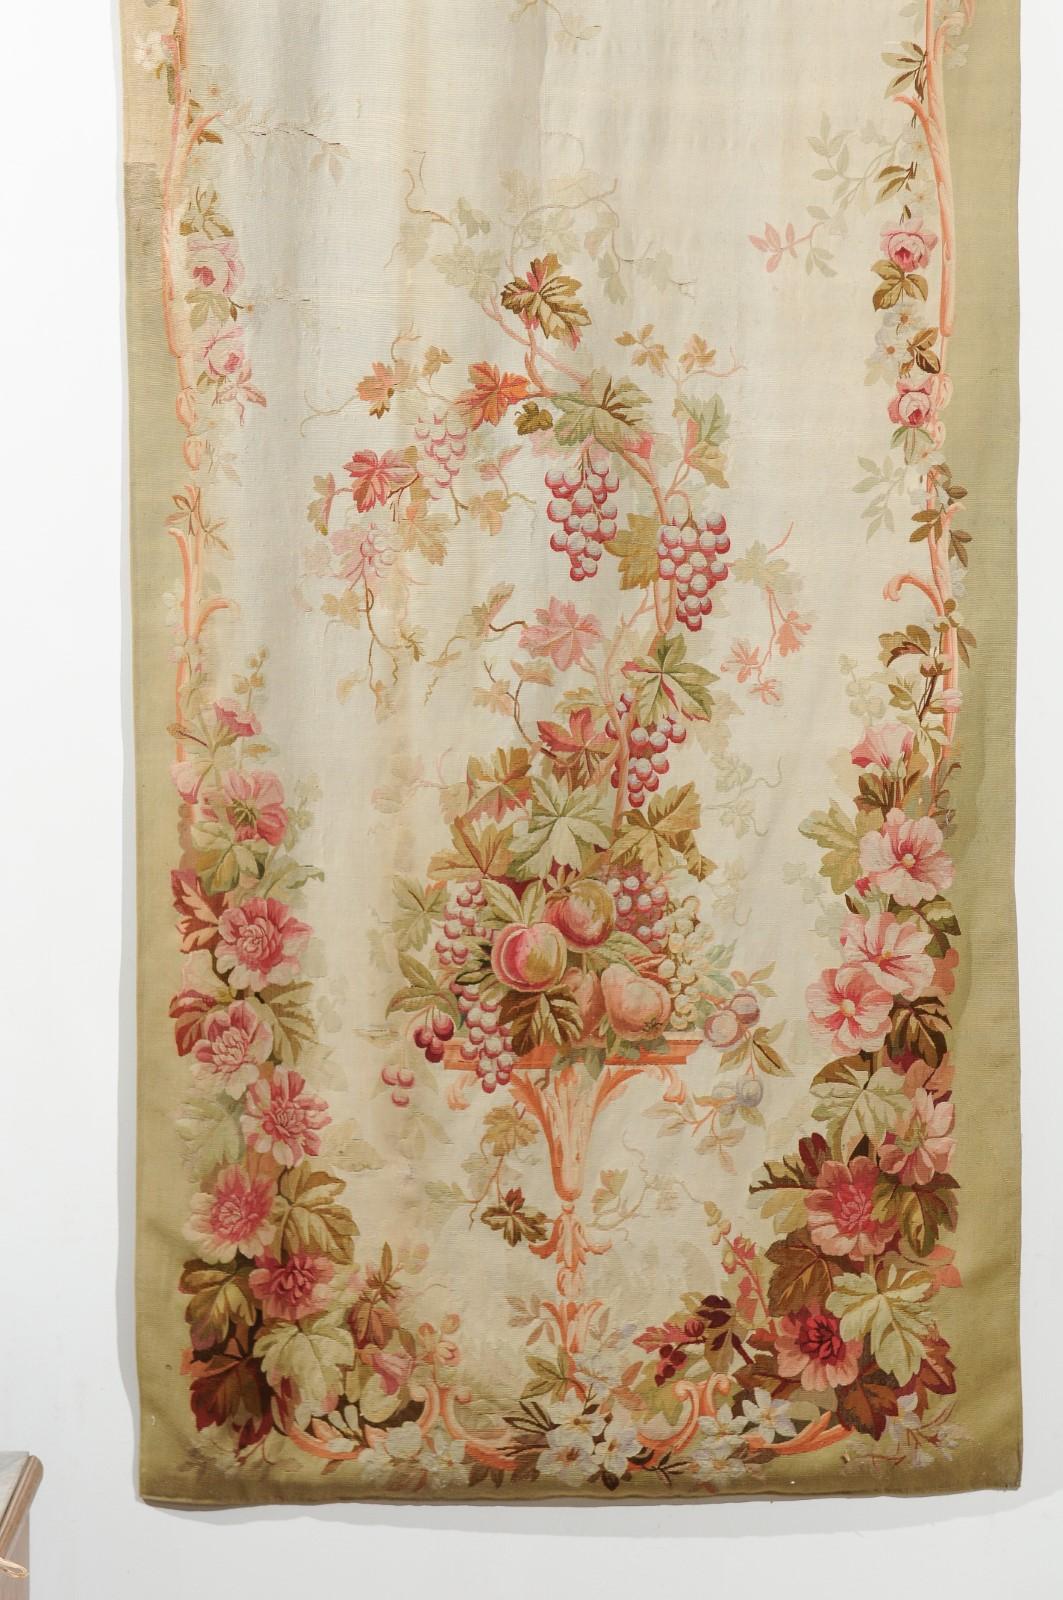 Two French vertical Aubusson tapestries from the 19th century with flowers and fruits, priced and sold individually. Born in the famous Aubusson Manufacture located in central France during the 19th century, each of these tapestries features an